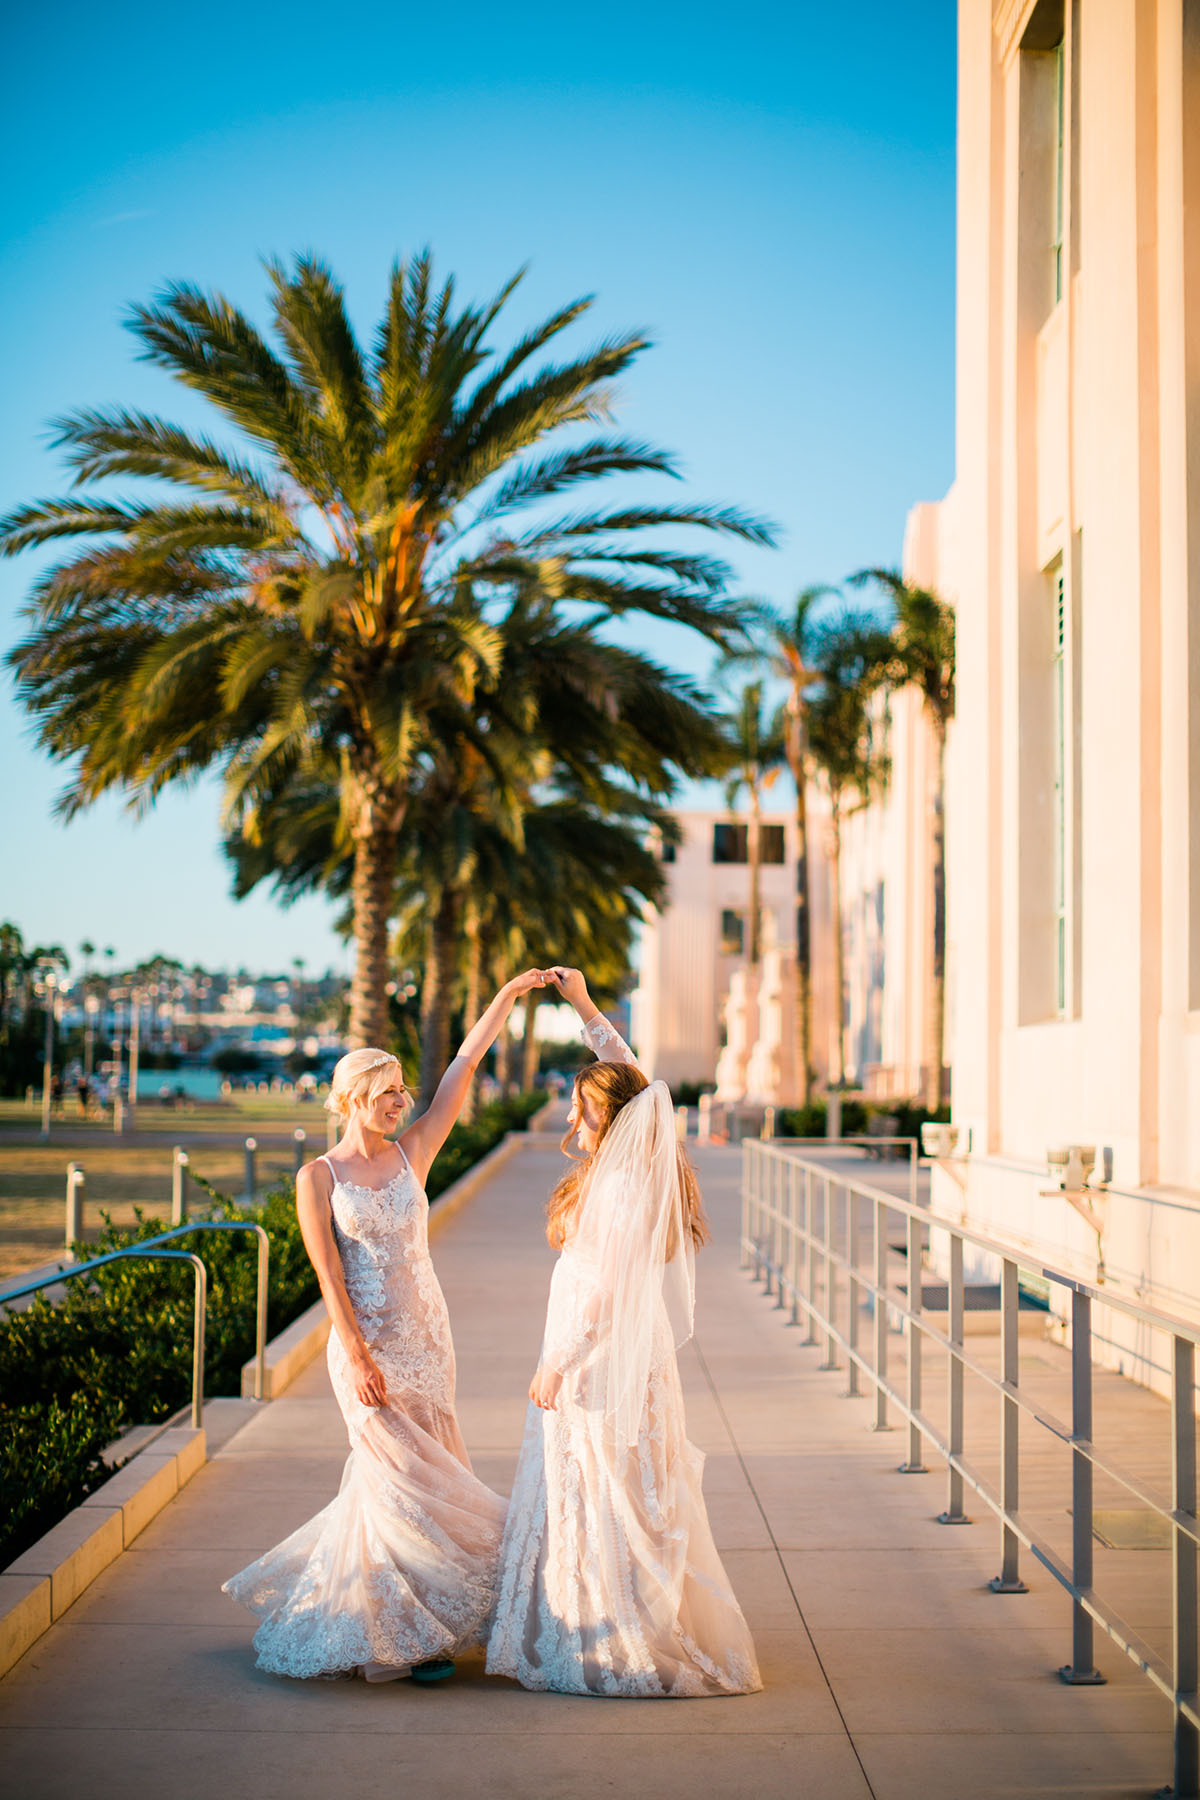 Whimsical, rustic waterfront wedding in San Diego, California two brides LGBTQ+ weddings sunny succulents dance palm tree